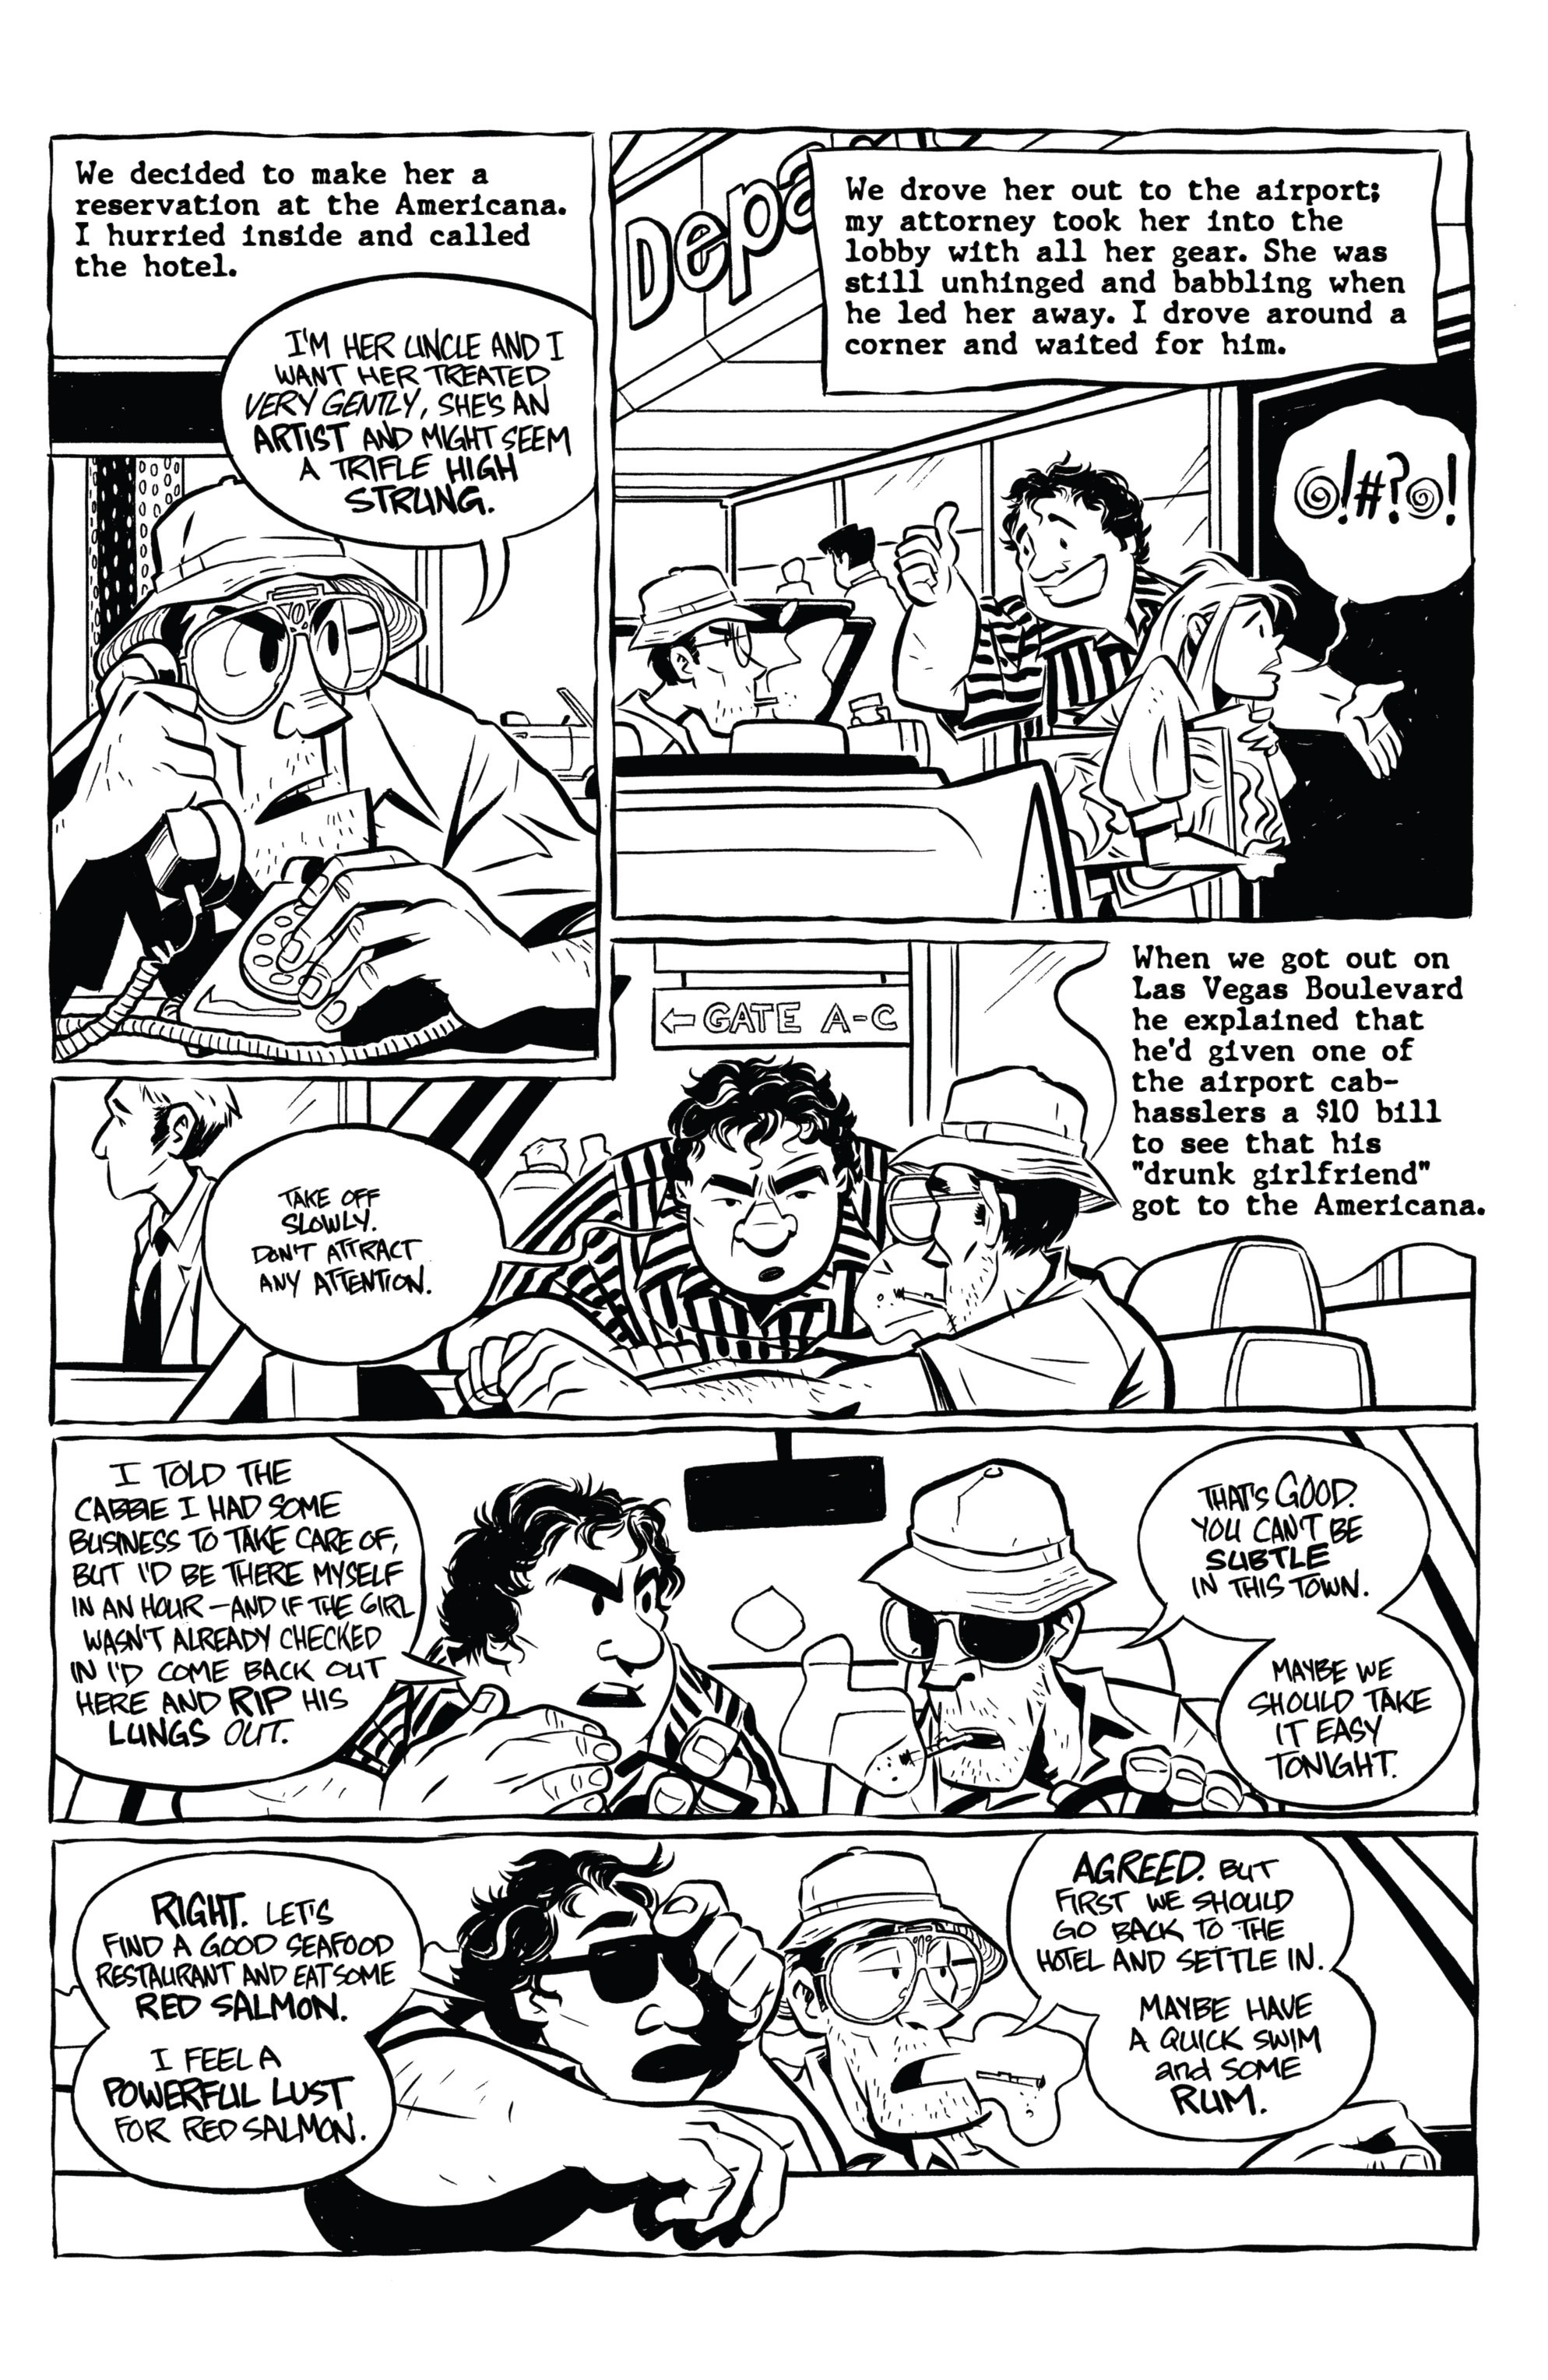 Read online Hunter S. Thompson's Fear and Loathing in Las Vegas comic -  Issue #3 - 27